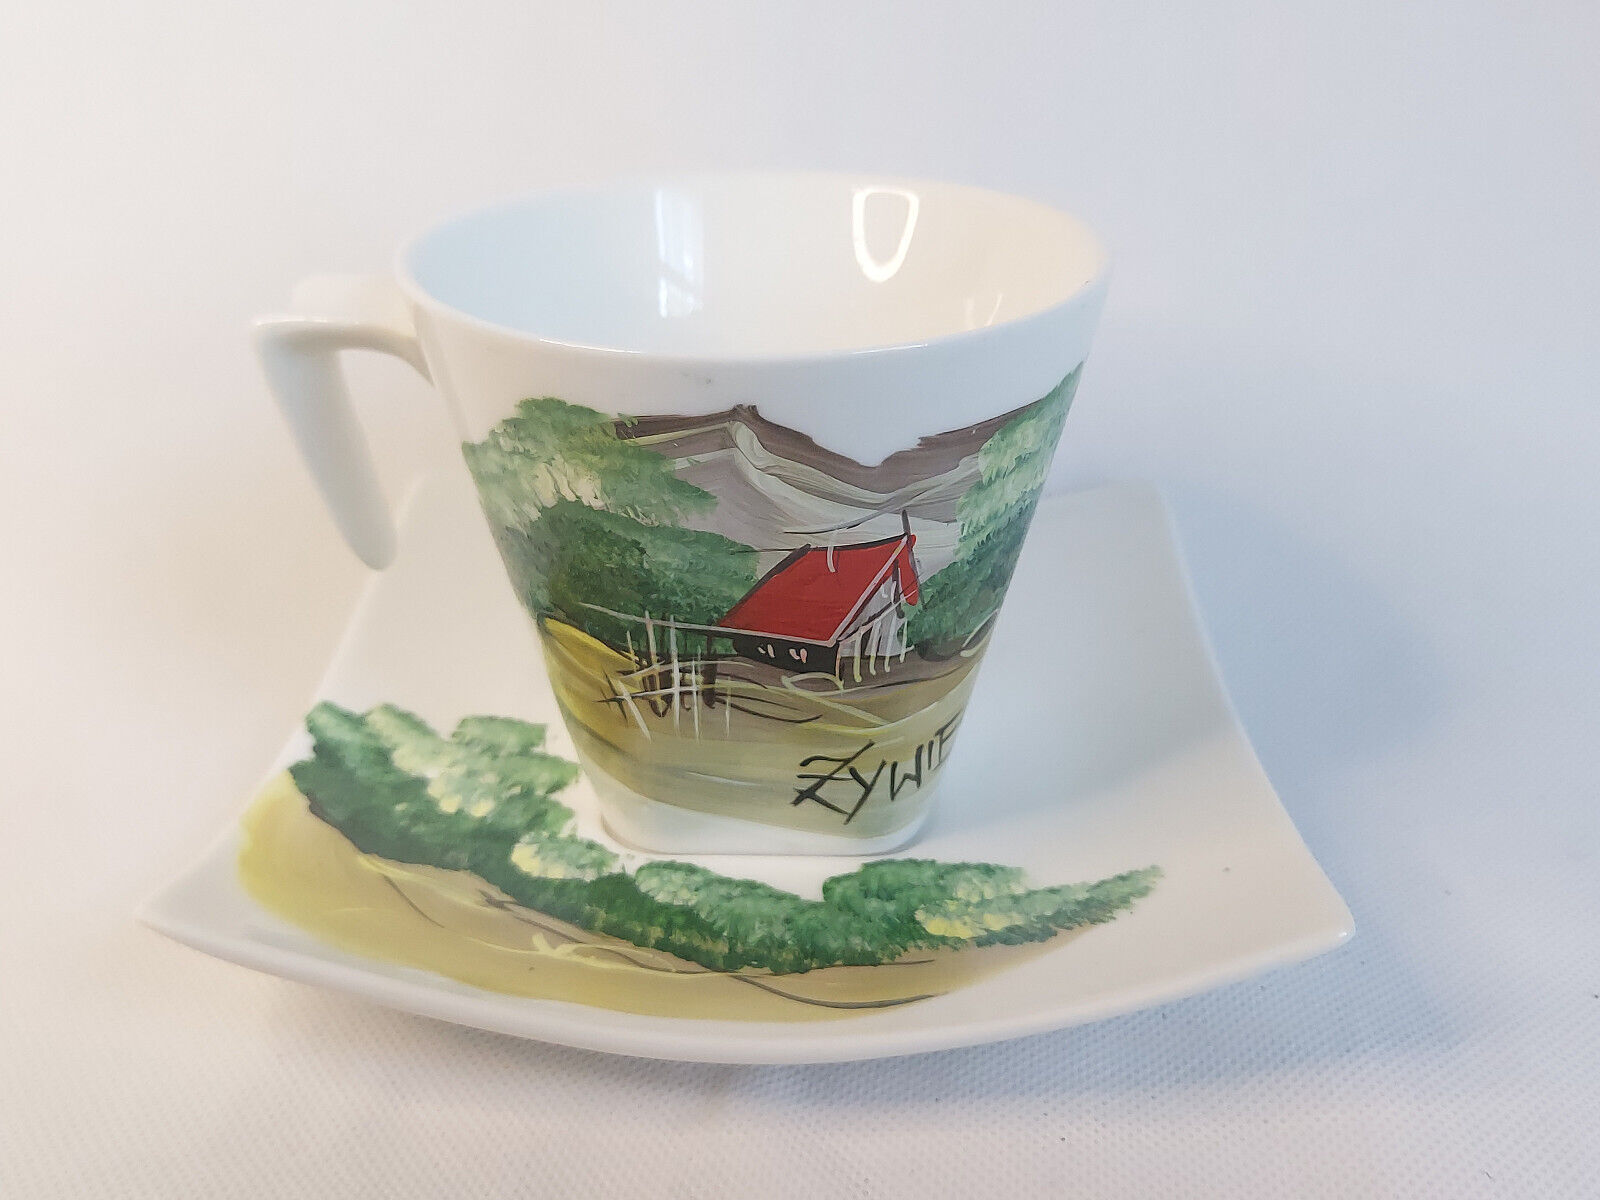 Vtg Saba Coffee Cup & Saucer With Handpainted Zywiec Lake Scene